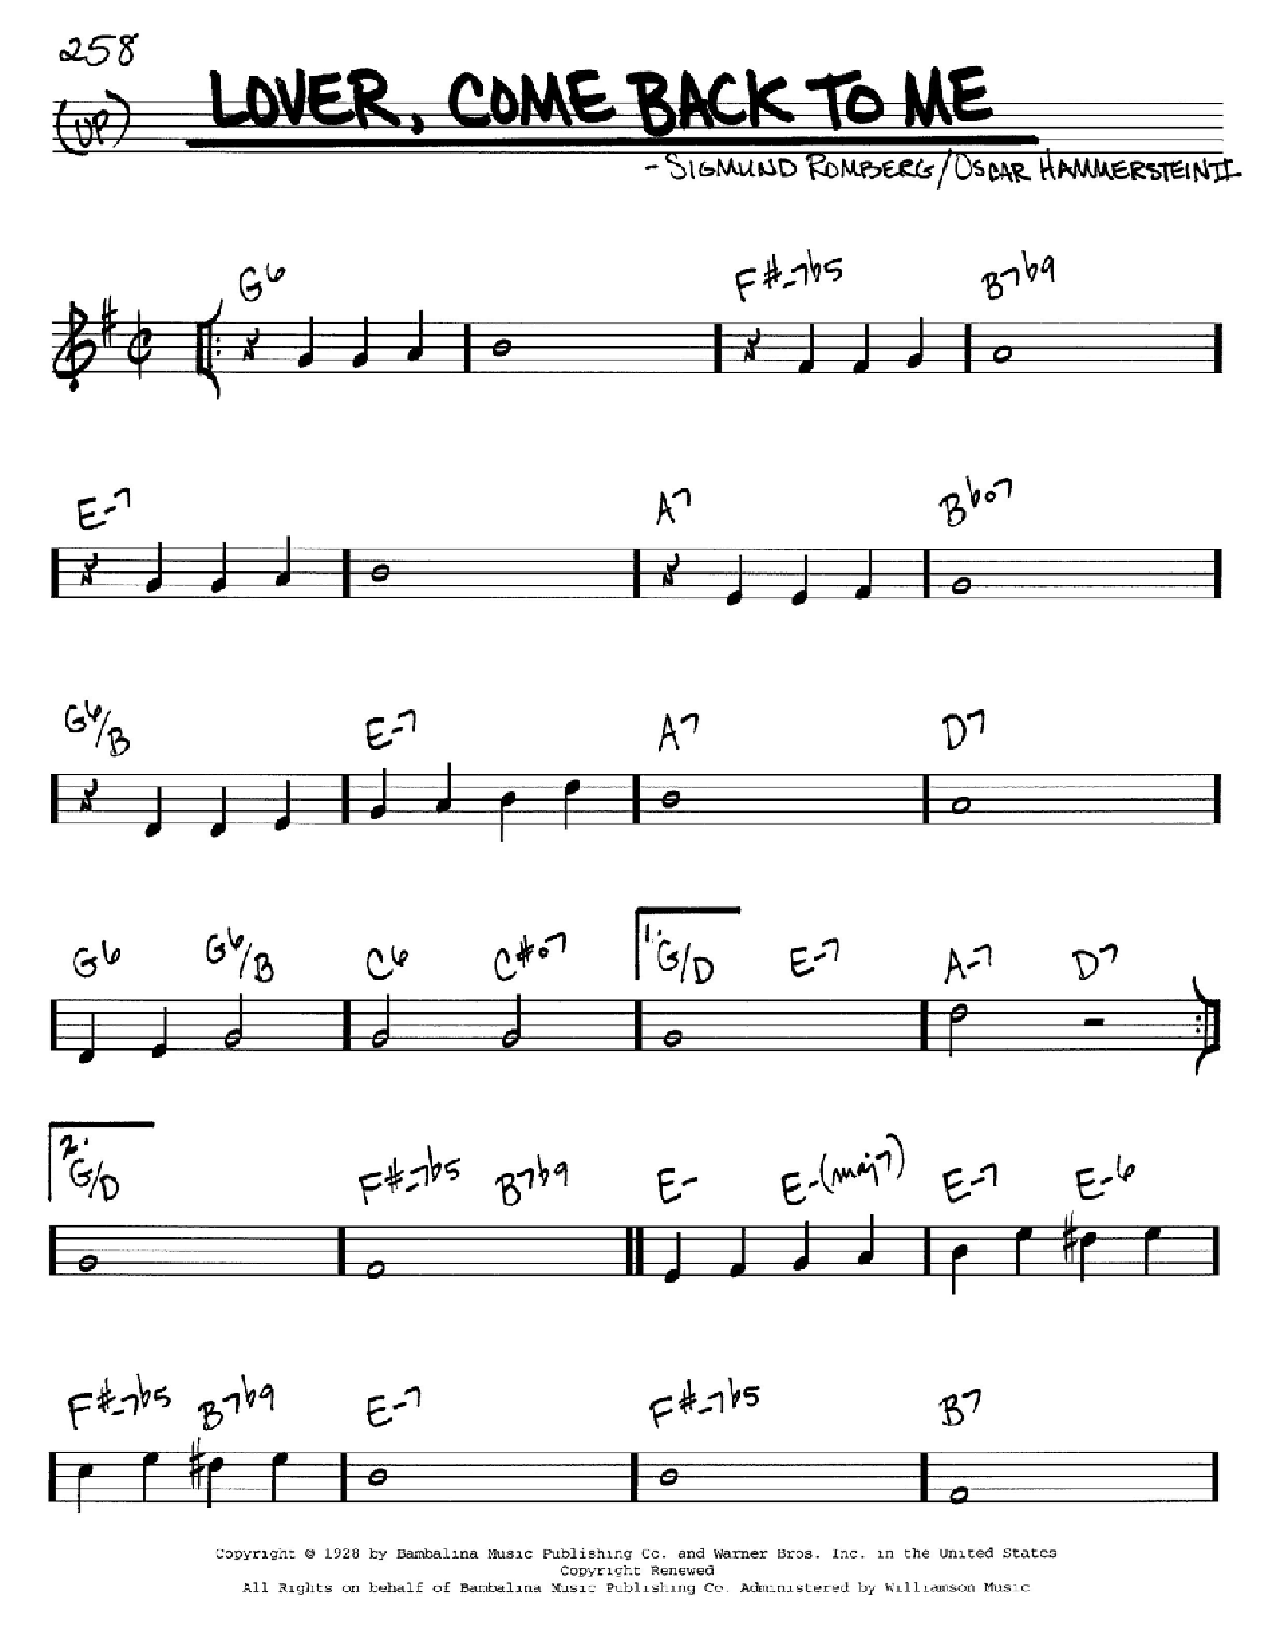 Download Sigmund Romberg Lover, Come Back To Me Sheet Music